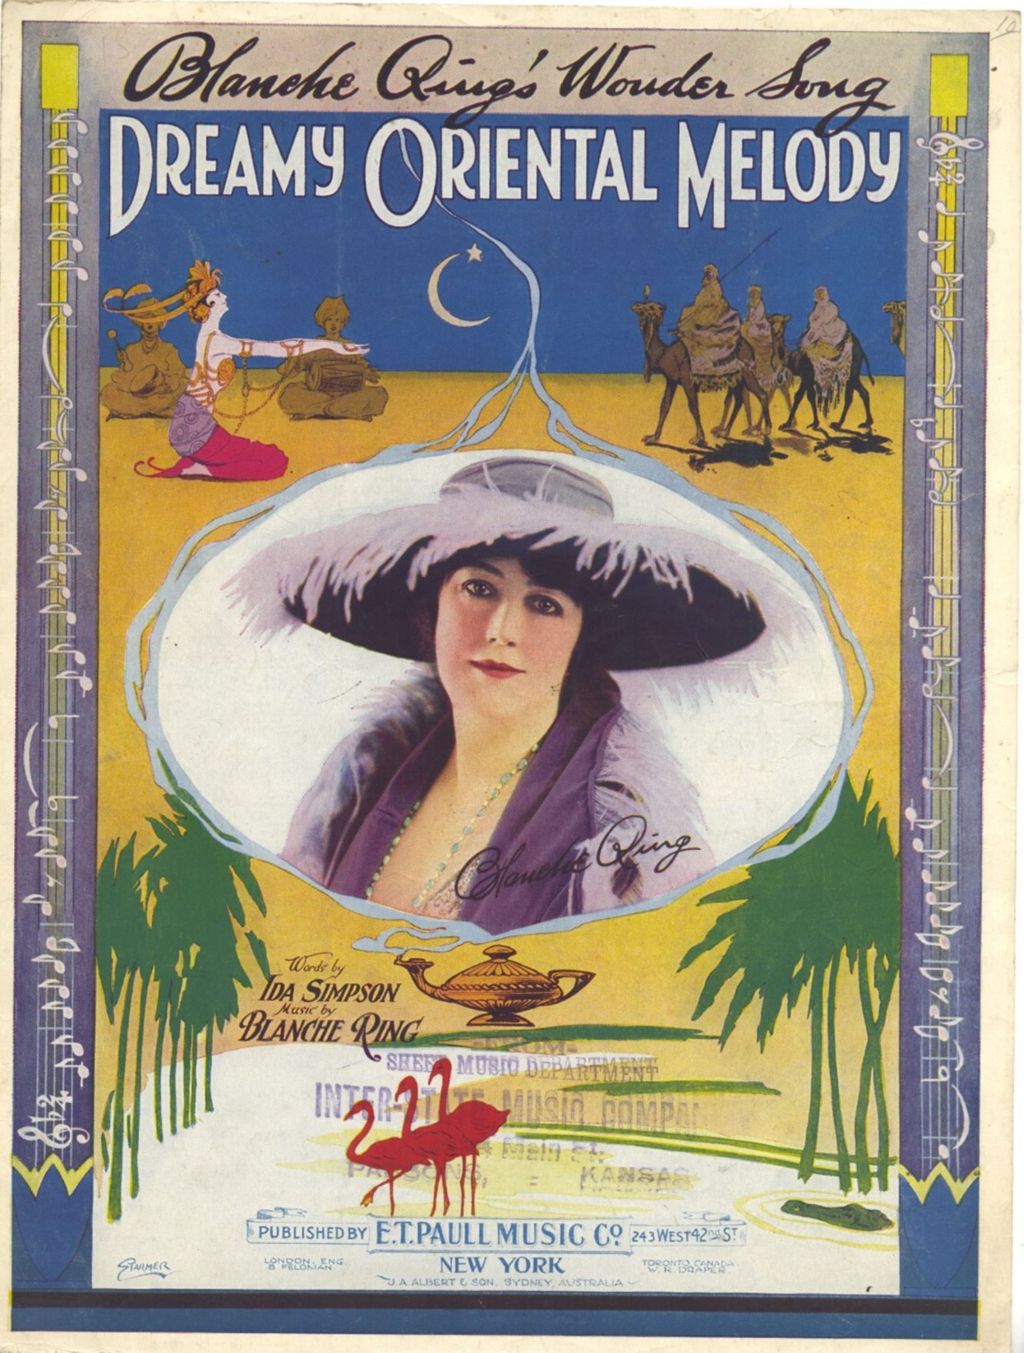 Dreamy Oriental Melody (Blanche Ring's Wonder Song)